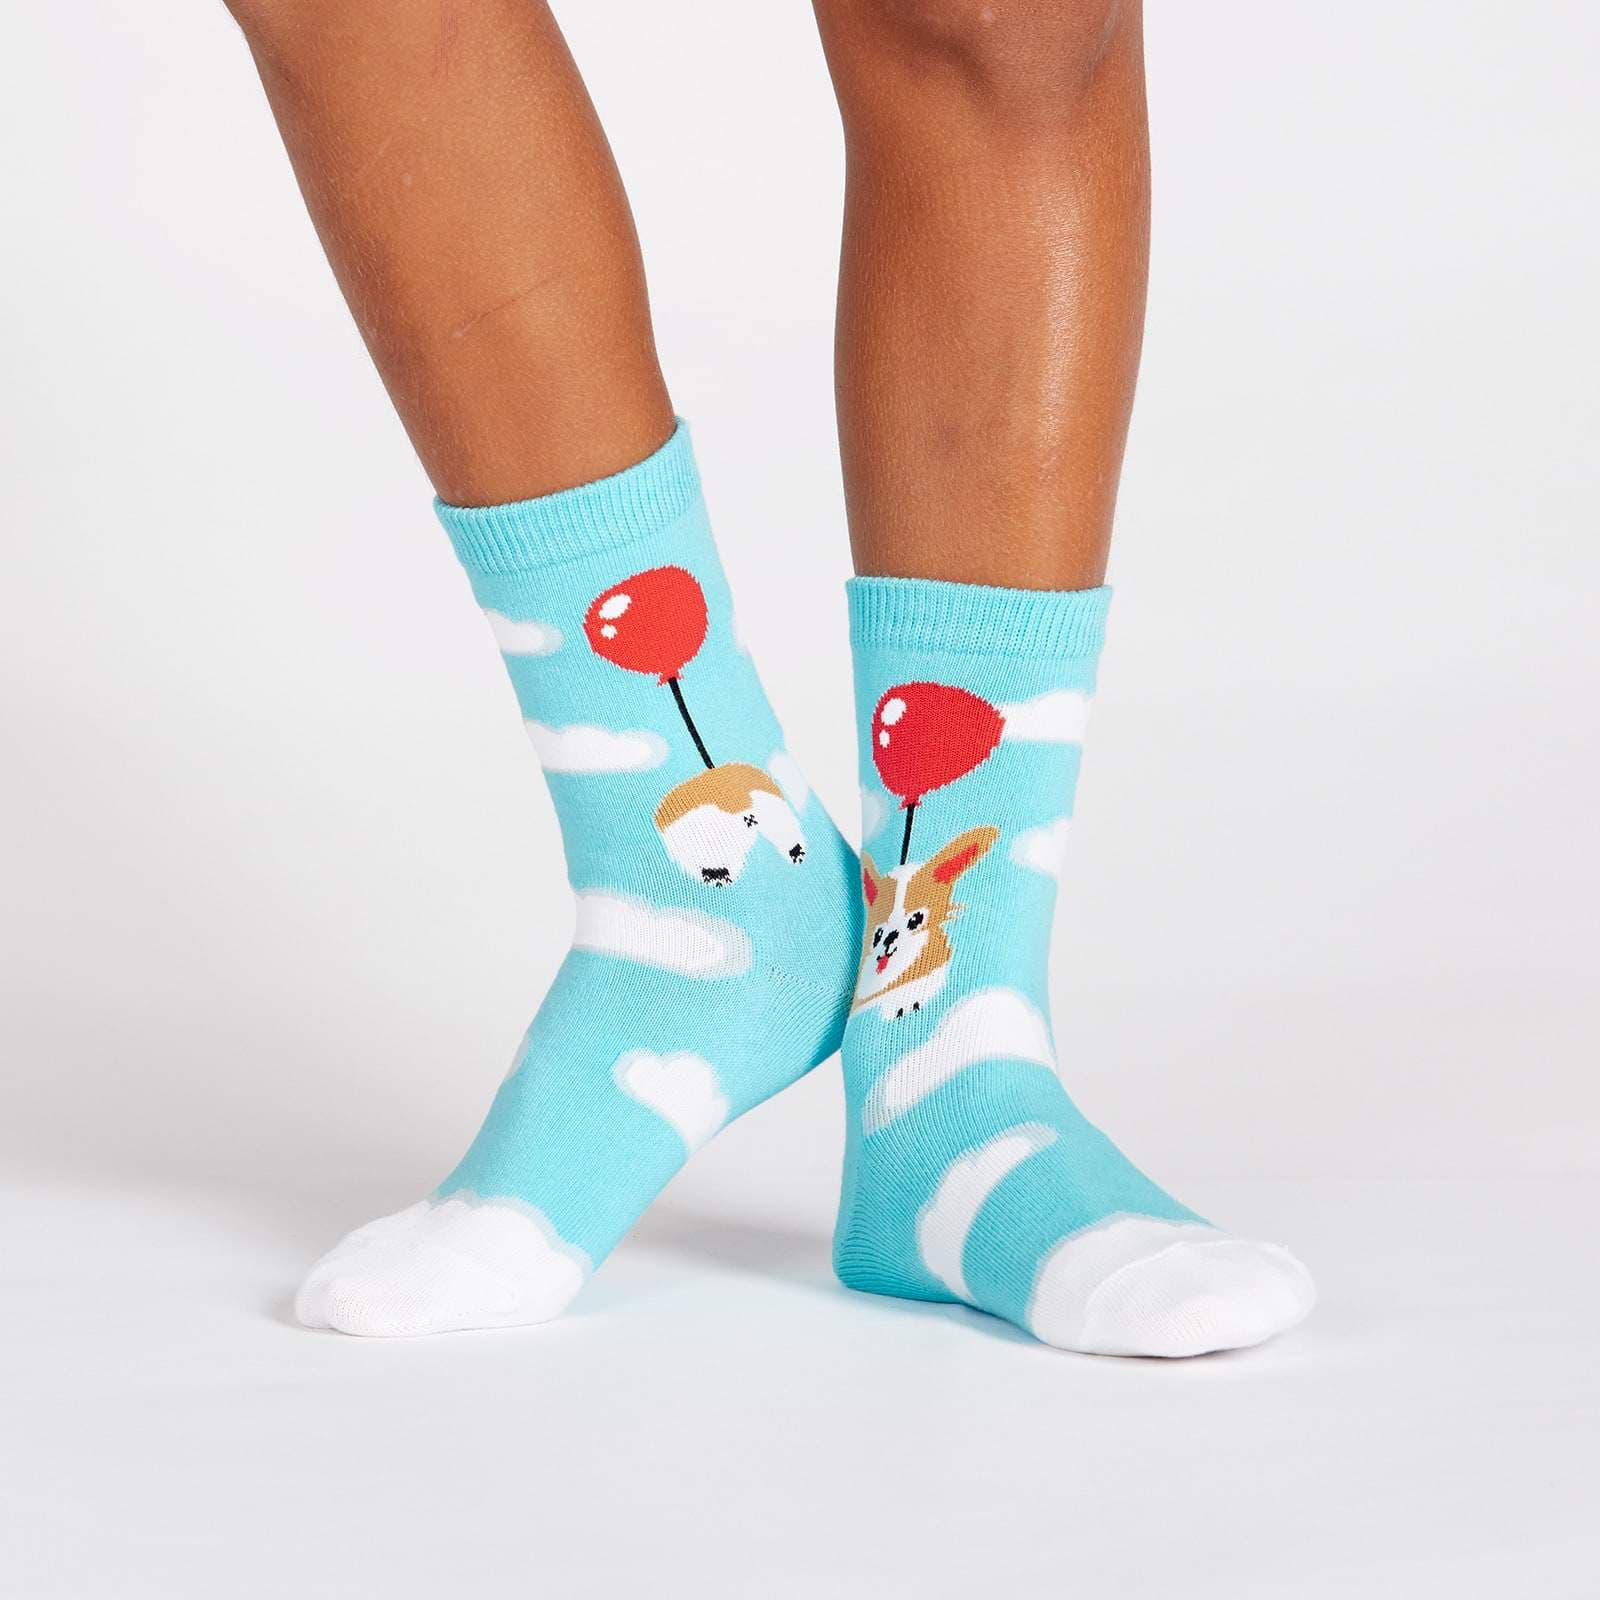 Pup Pup and Away Kid's Crew Socks (Ages 7-10)